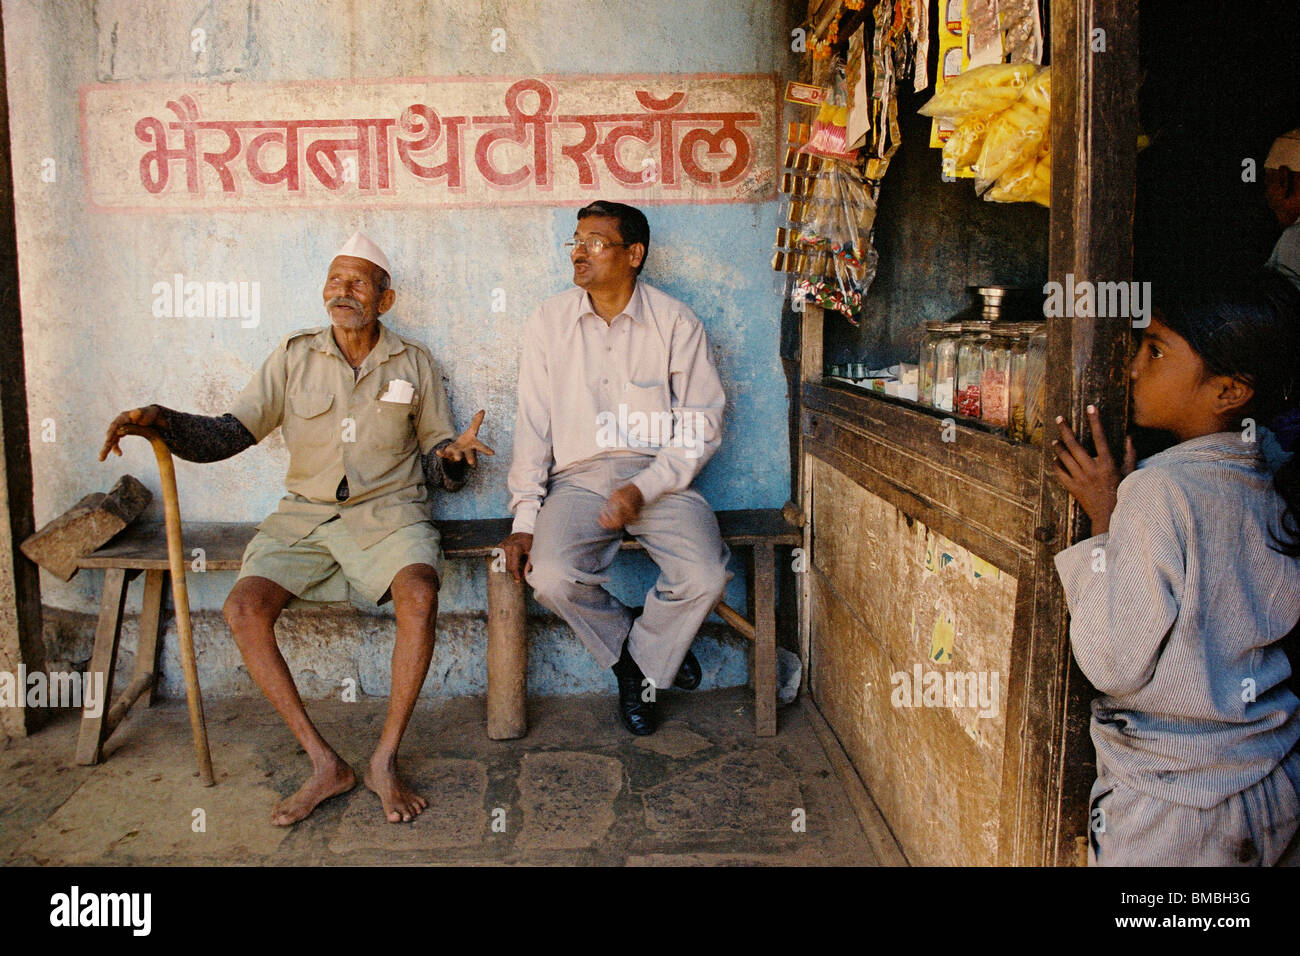 Two men having a conversation at a tea shop in the hill station town of Panchgani, in the Western Ghats region, Maharashtra State, India. Stock Photo